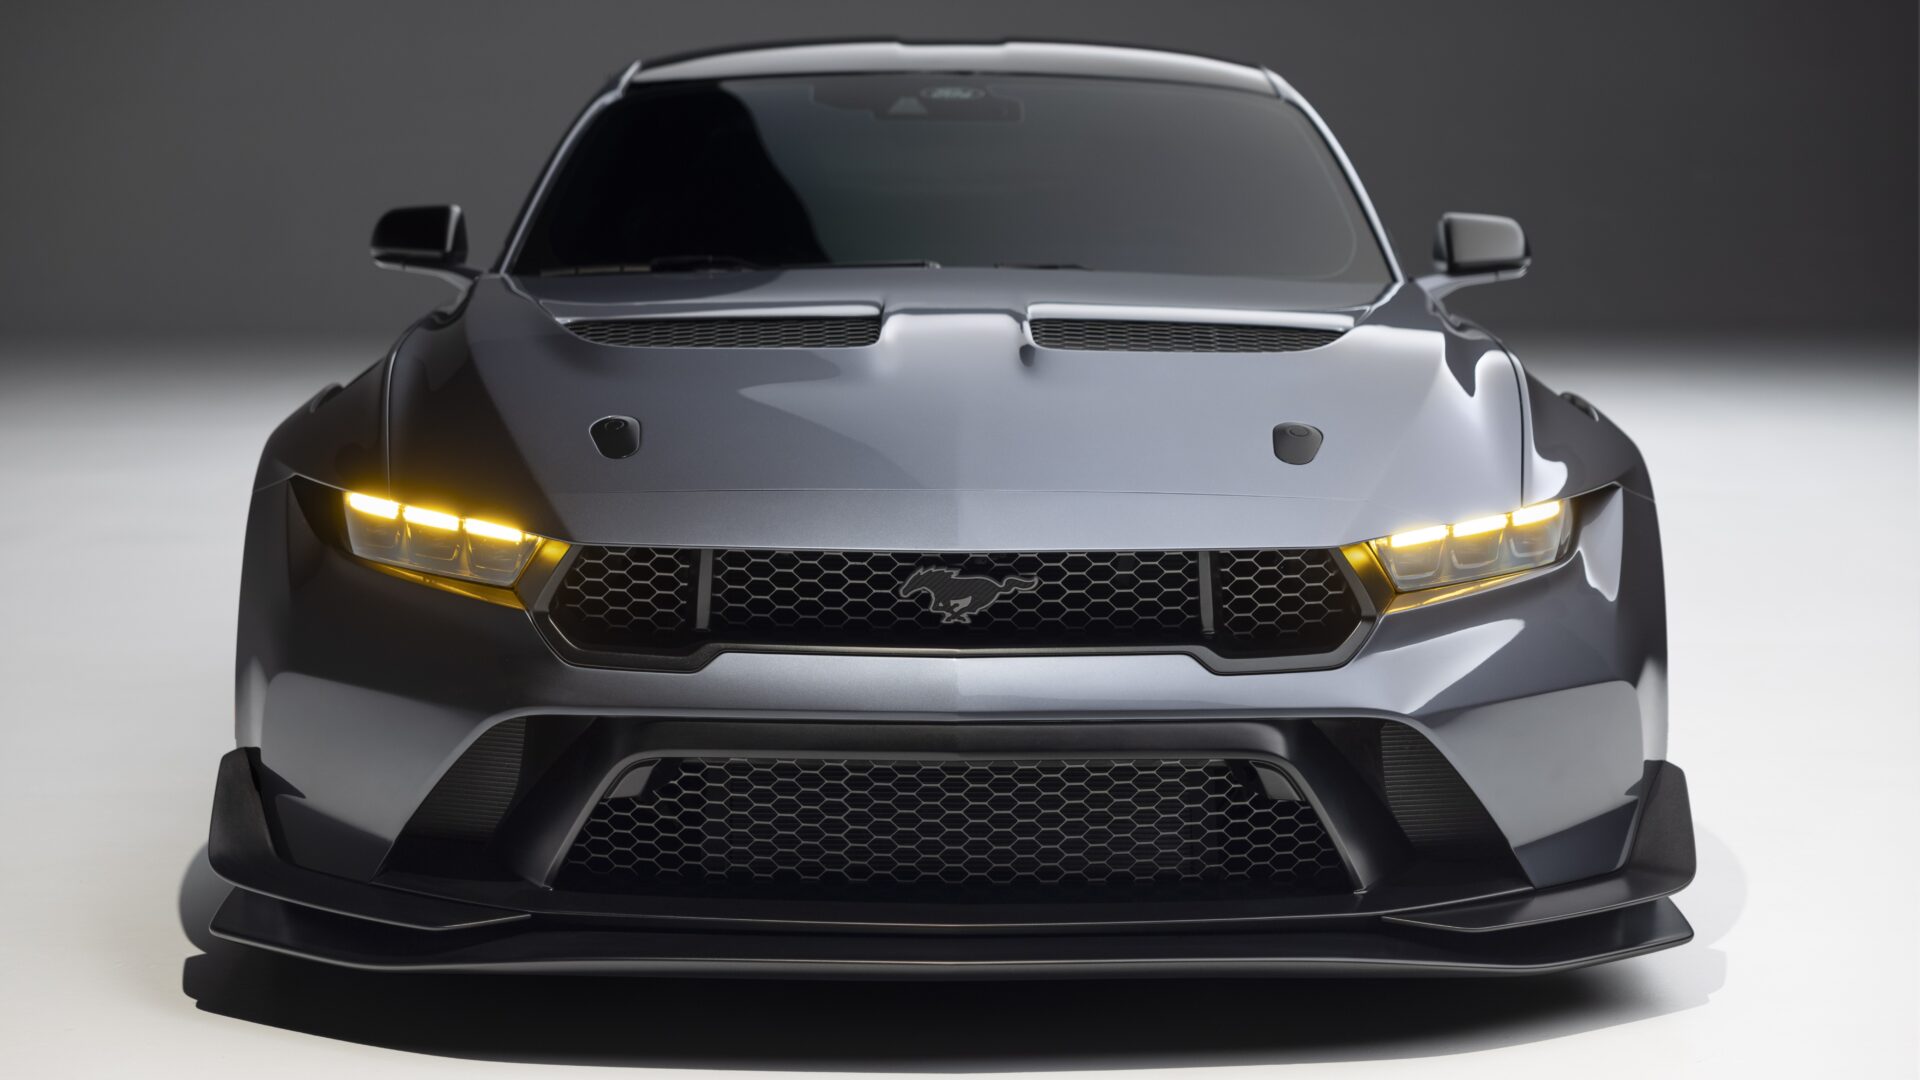 Supercar 2025 Ford Mustang GTD borrows technologies from the Mustang GT3 race car with 800 hp+ and chasing a sub-7 minute ring time